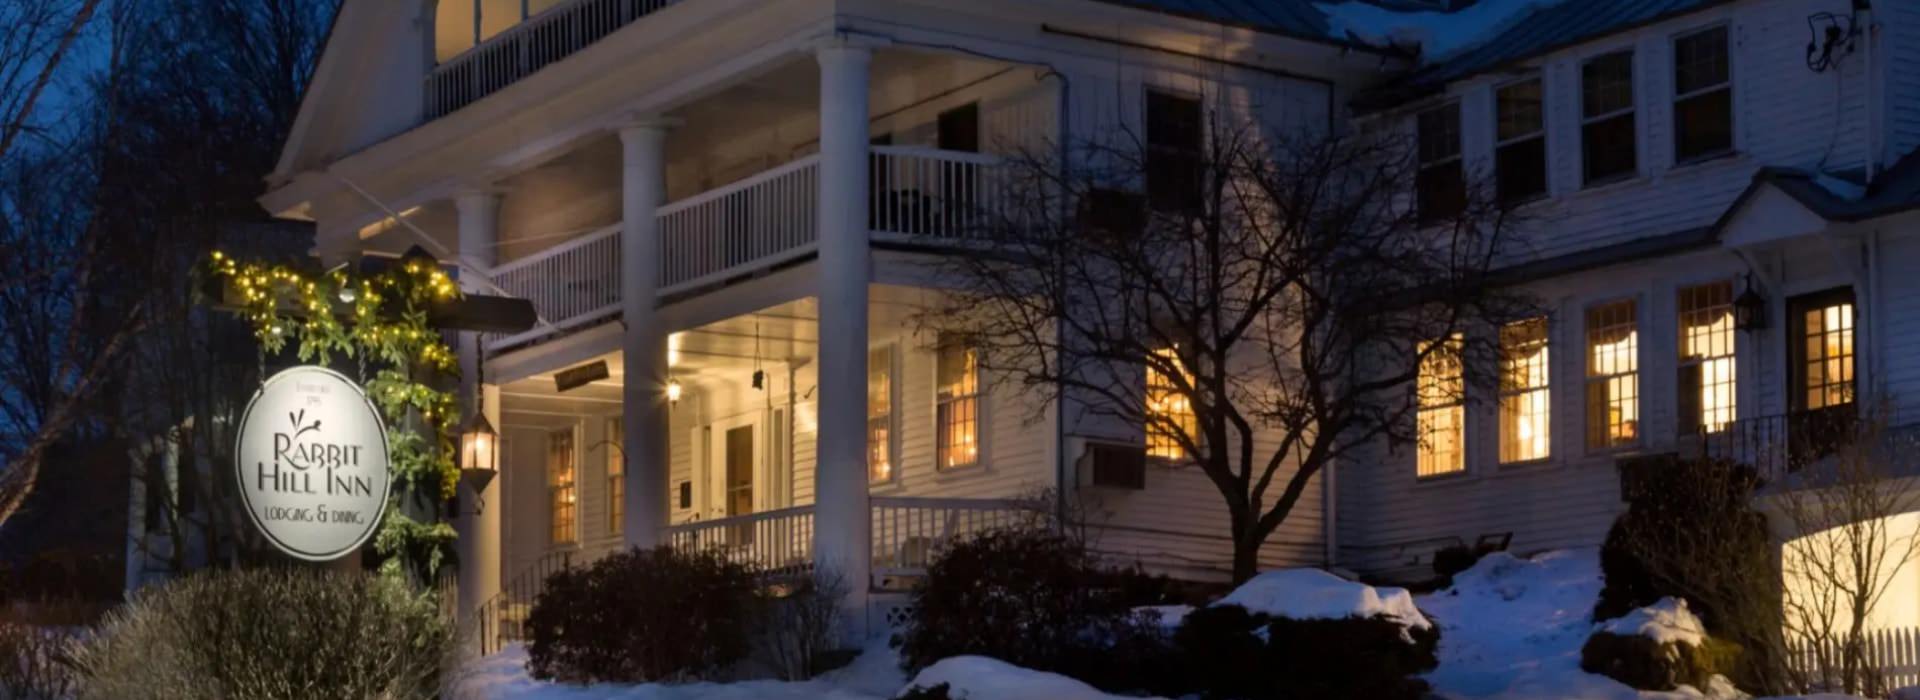 Exterior view of the property painted white with front porch and second level porch all surrounded by snow and winter-looking trees and shrubs at night